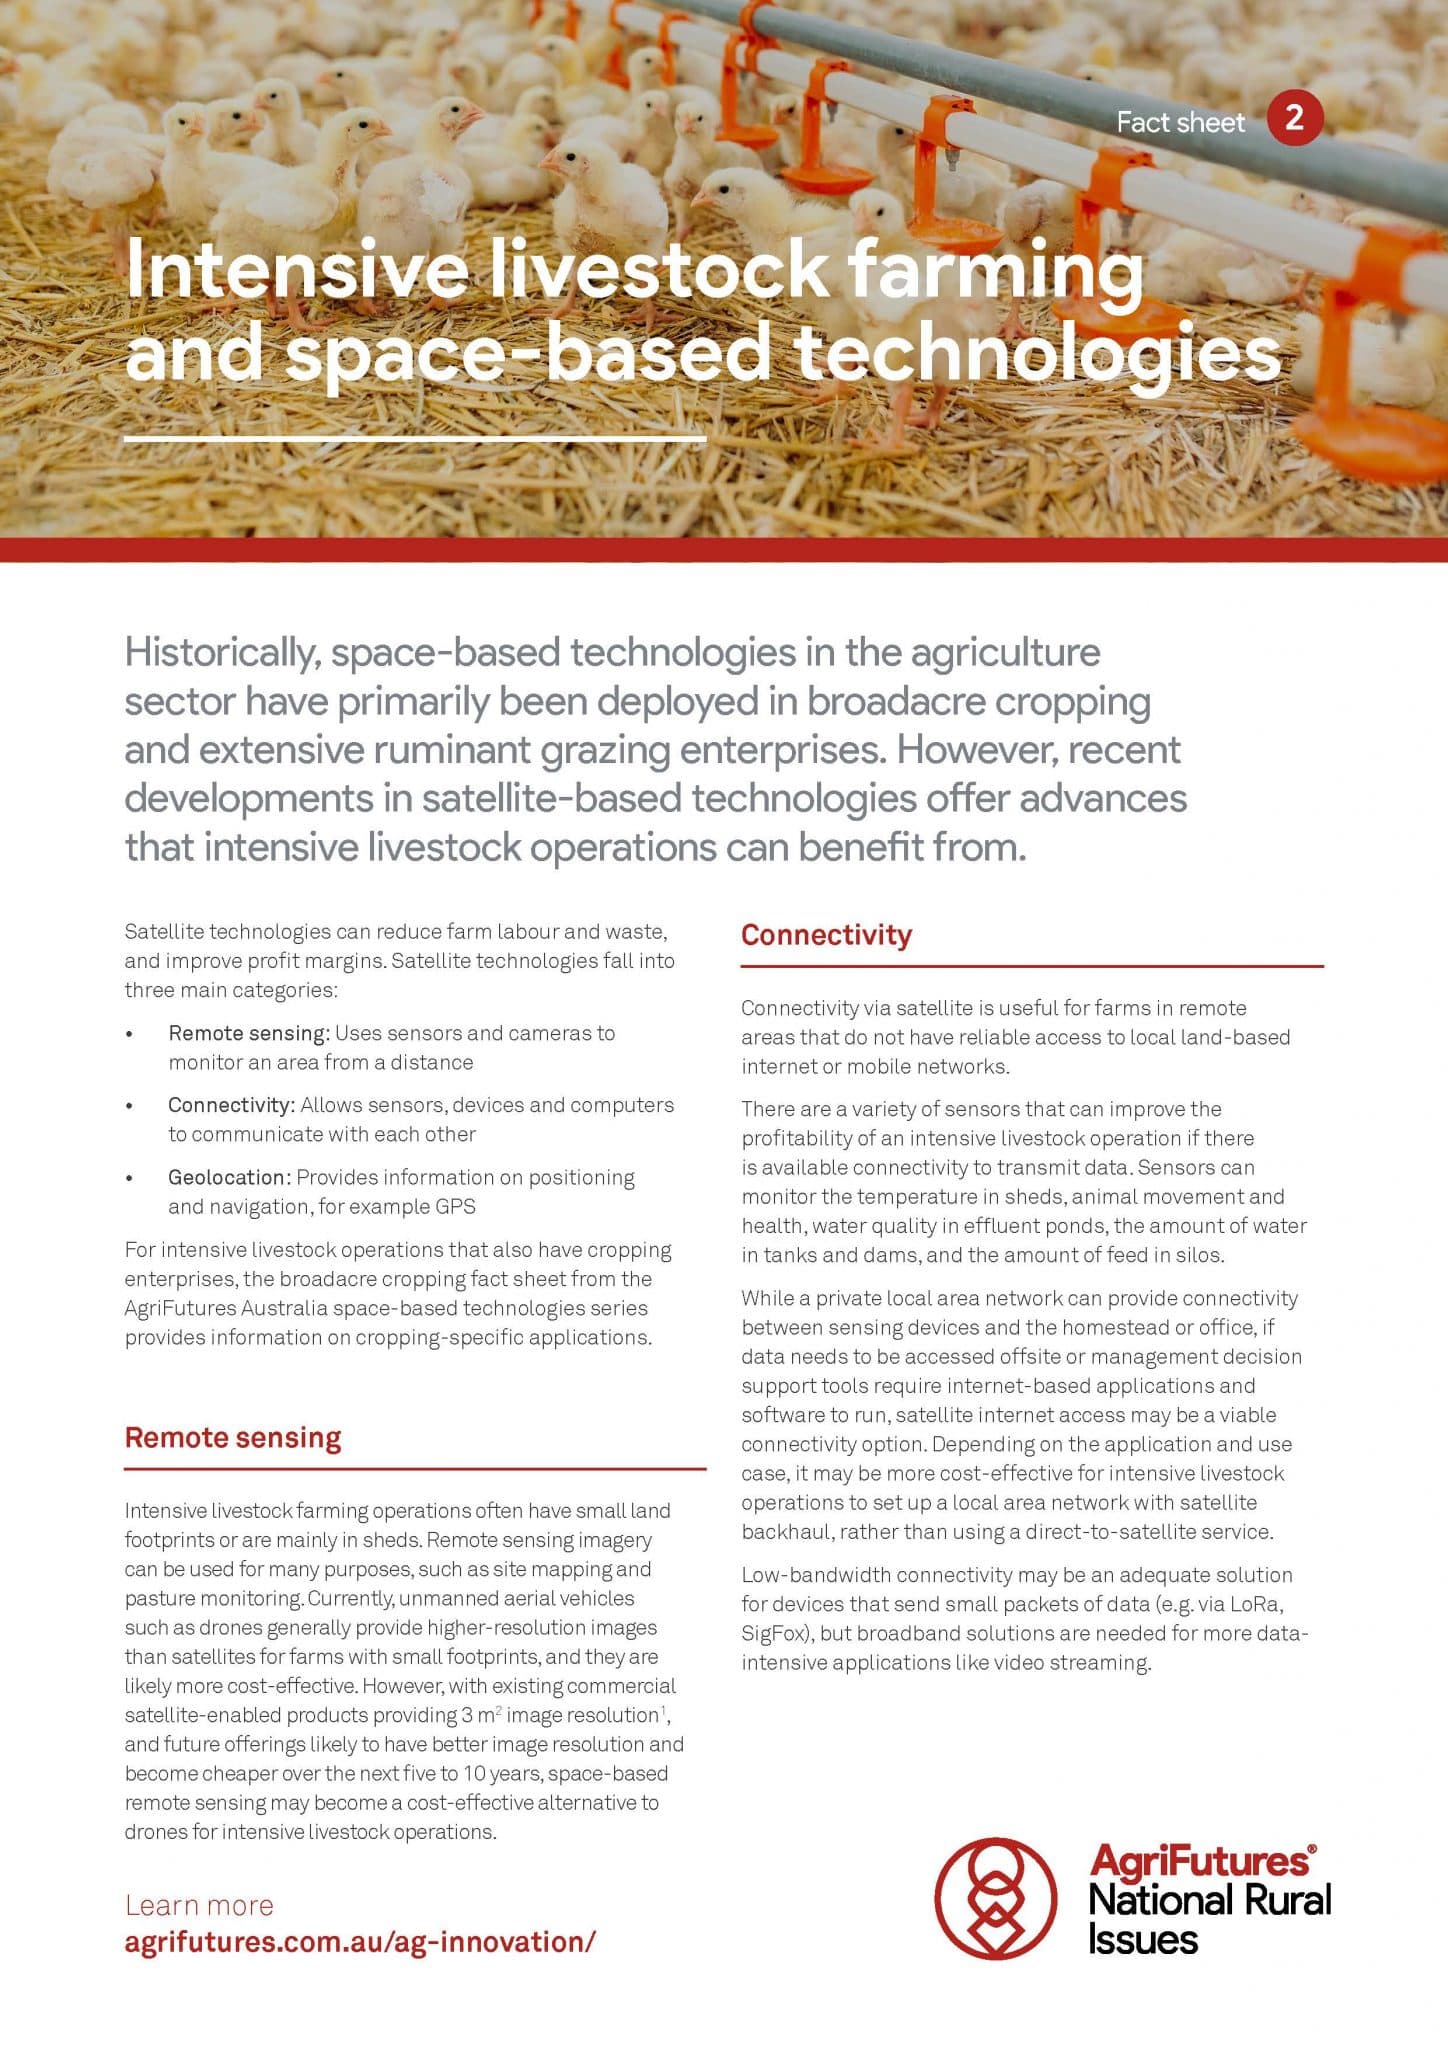 Fact sheet: Intensive livestock farming and space-based technologies - image